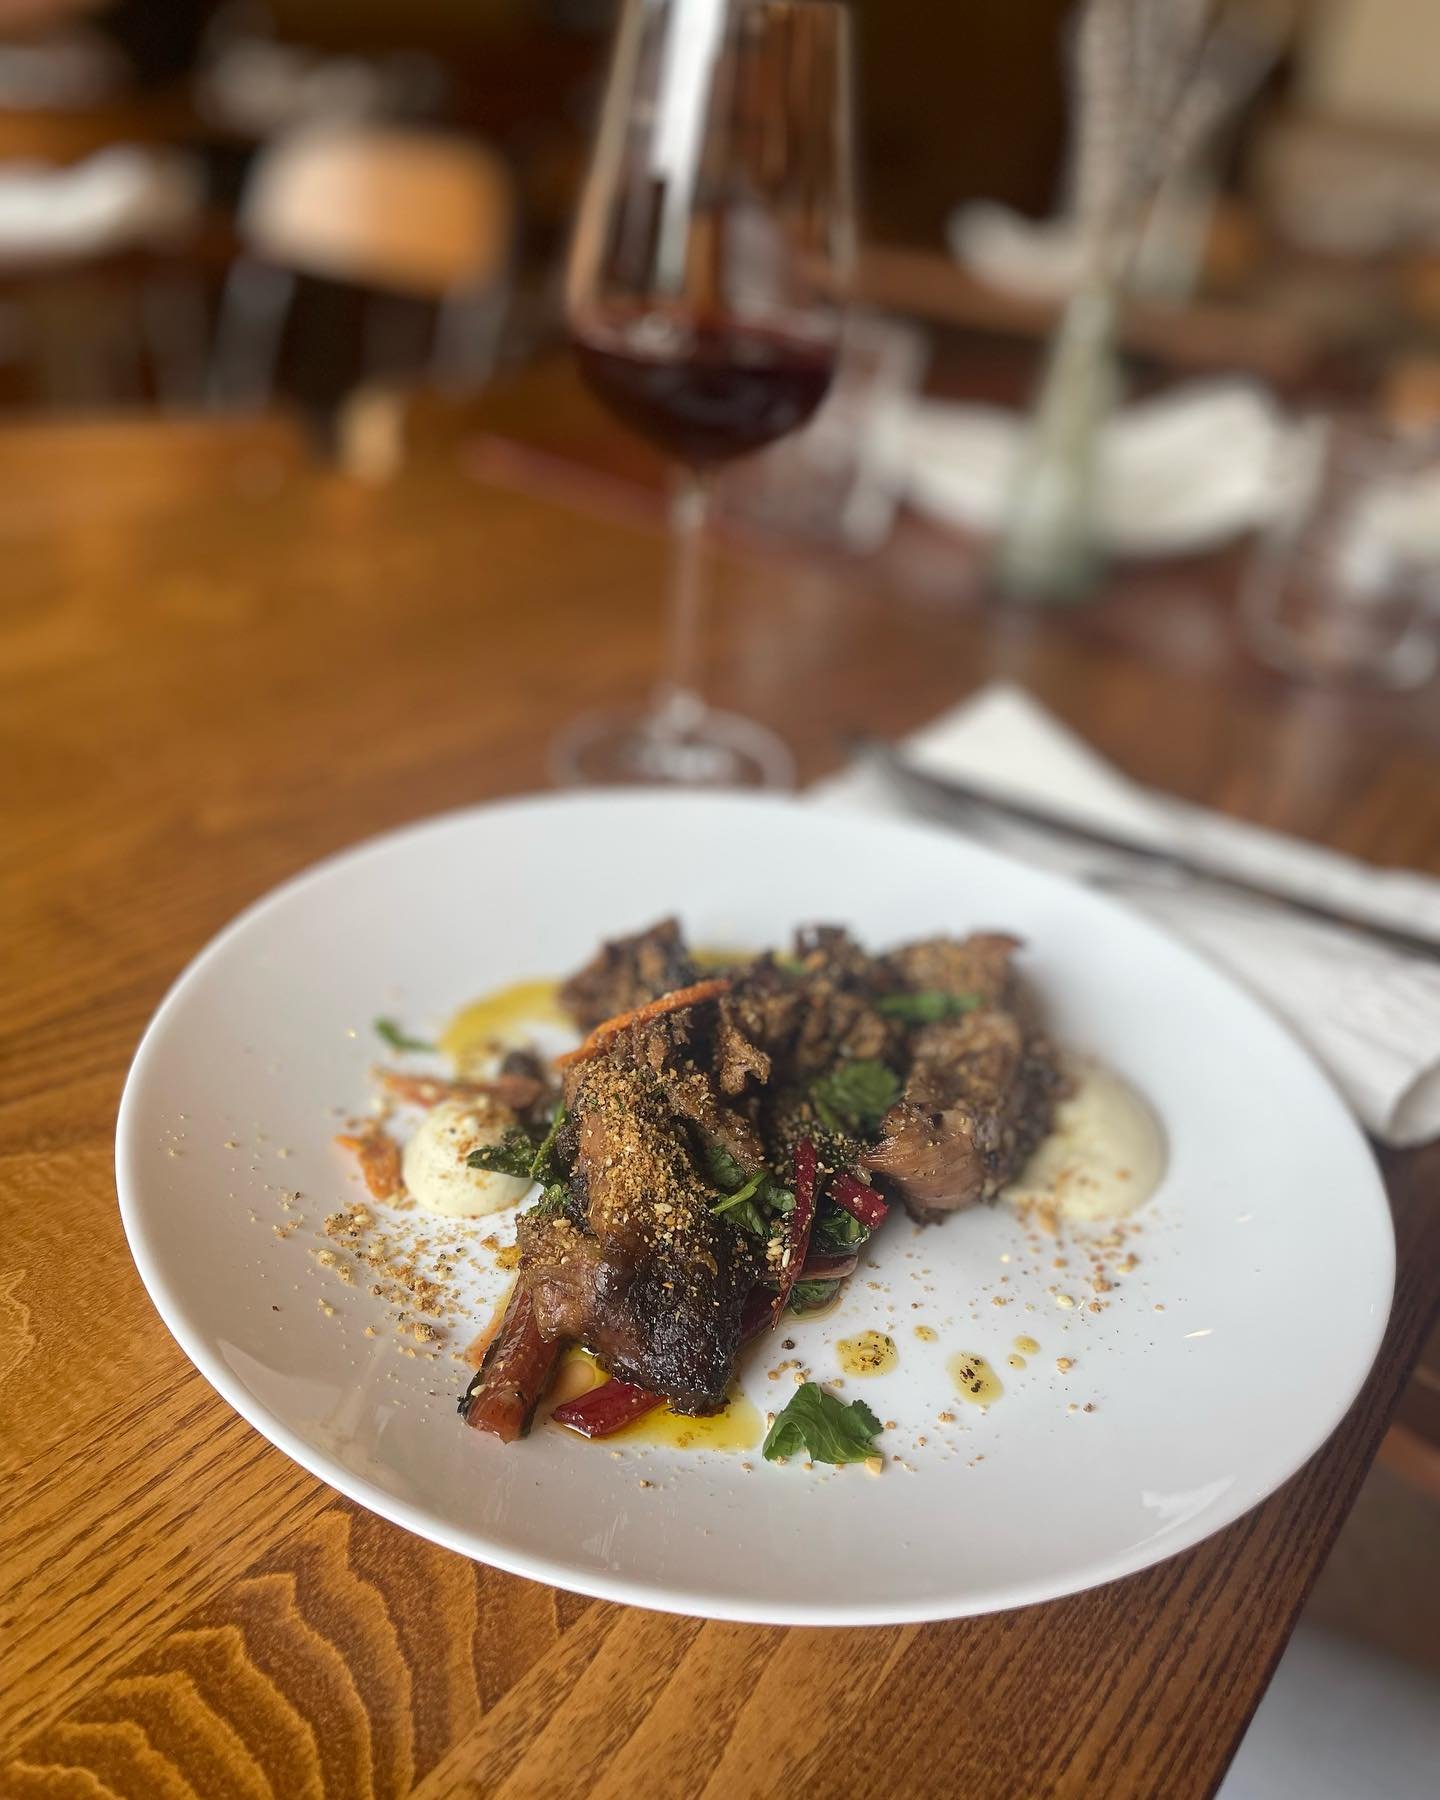 New dish for today! Slow-cooked spiced English lamb, rainbow chard and almond and celeriac cream.

Pairing nicely with our wine of the week, the beautiful Larcin from @instarouillet - a Merlot, cut with a little Malbec but bright and full of crunchy 